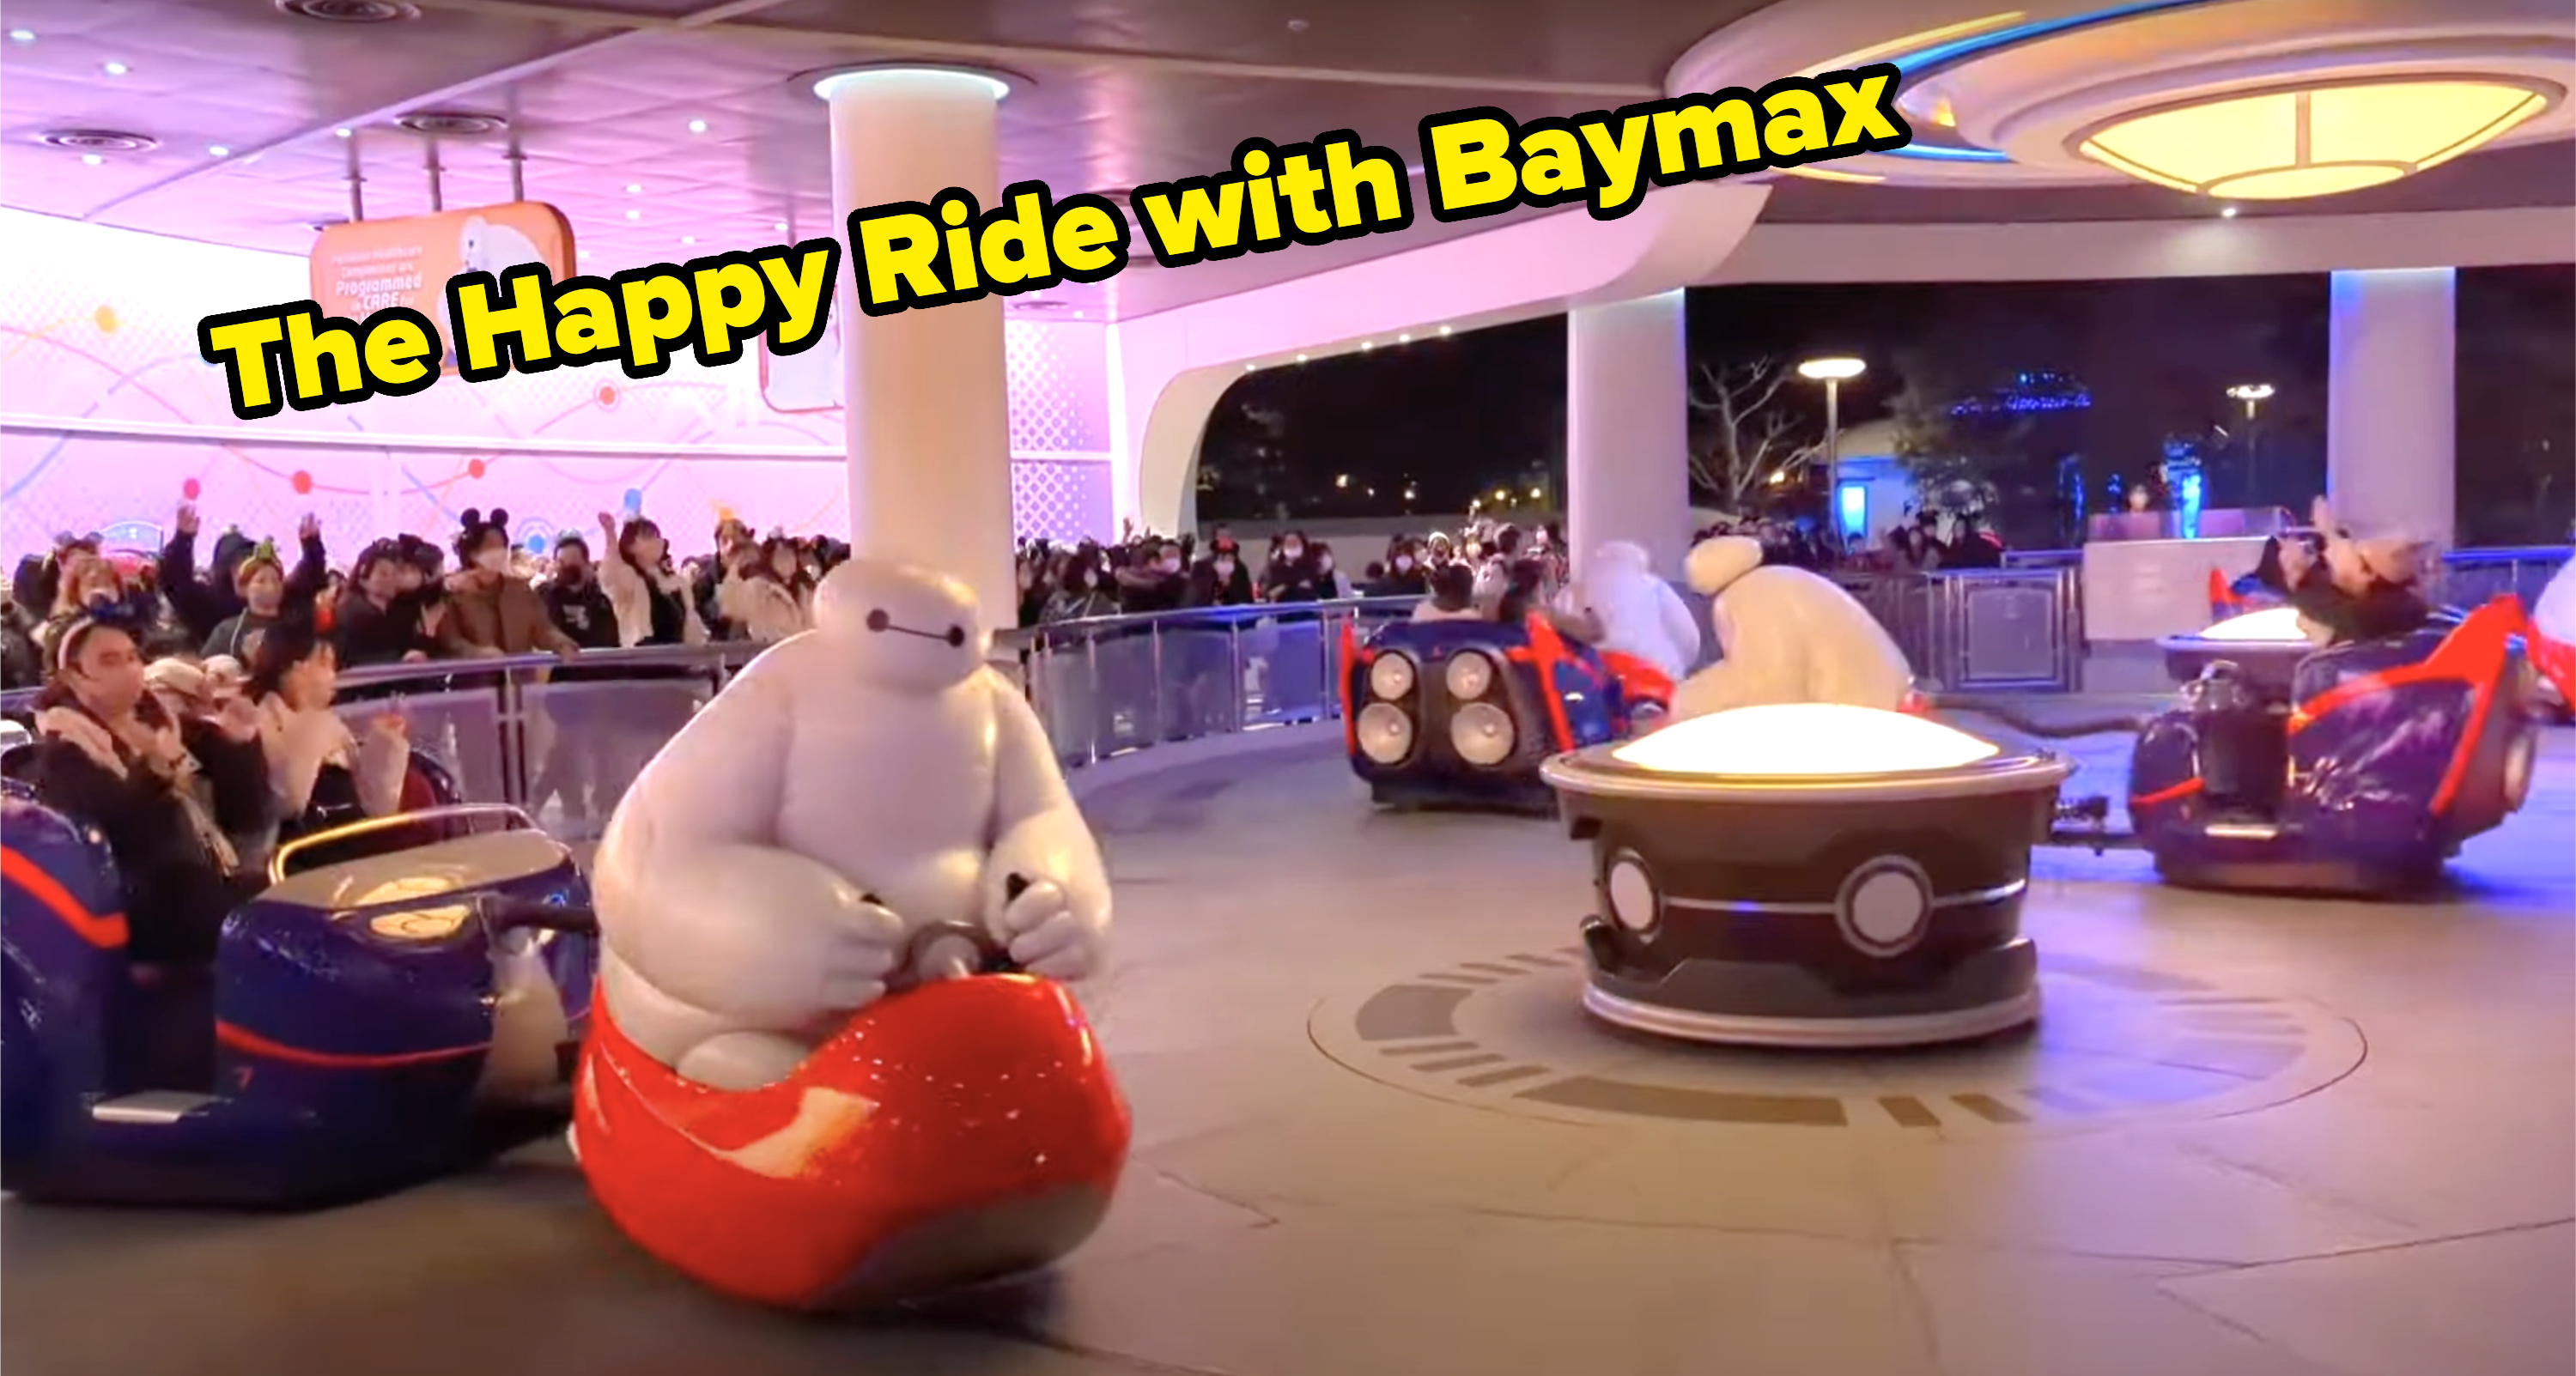 Guests enjoying the Baymax-themed ride at Disneyland, featuring Baymax-shaped cars spinning in a colorful, futuristic environment